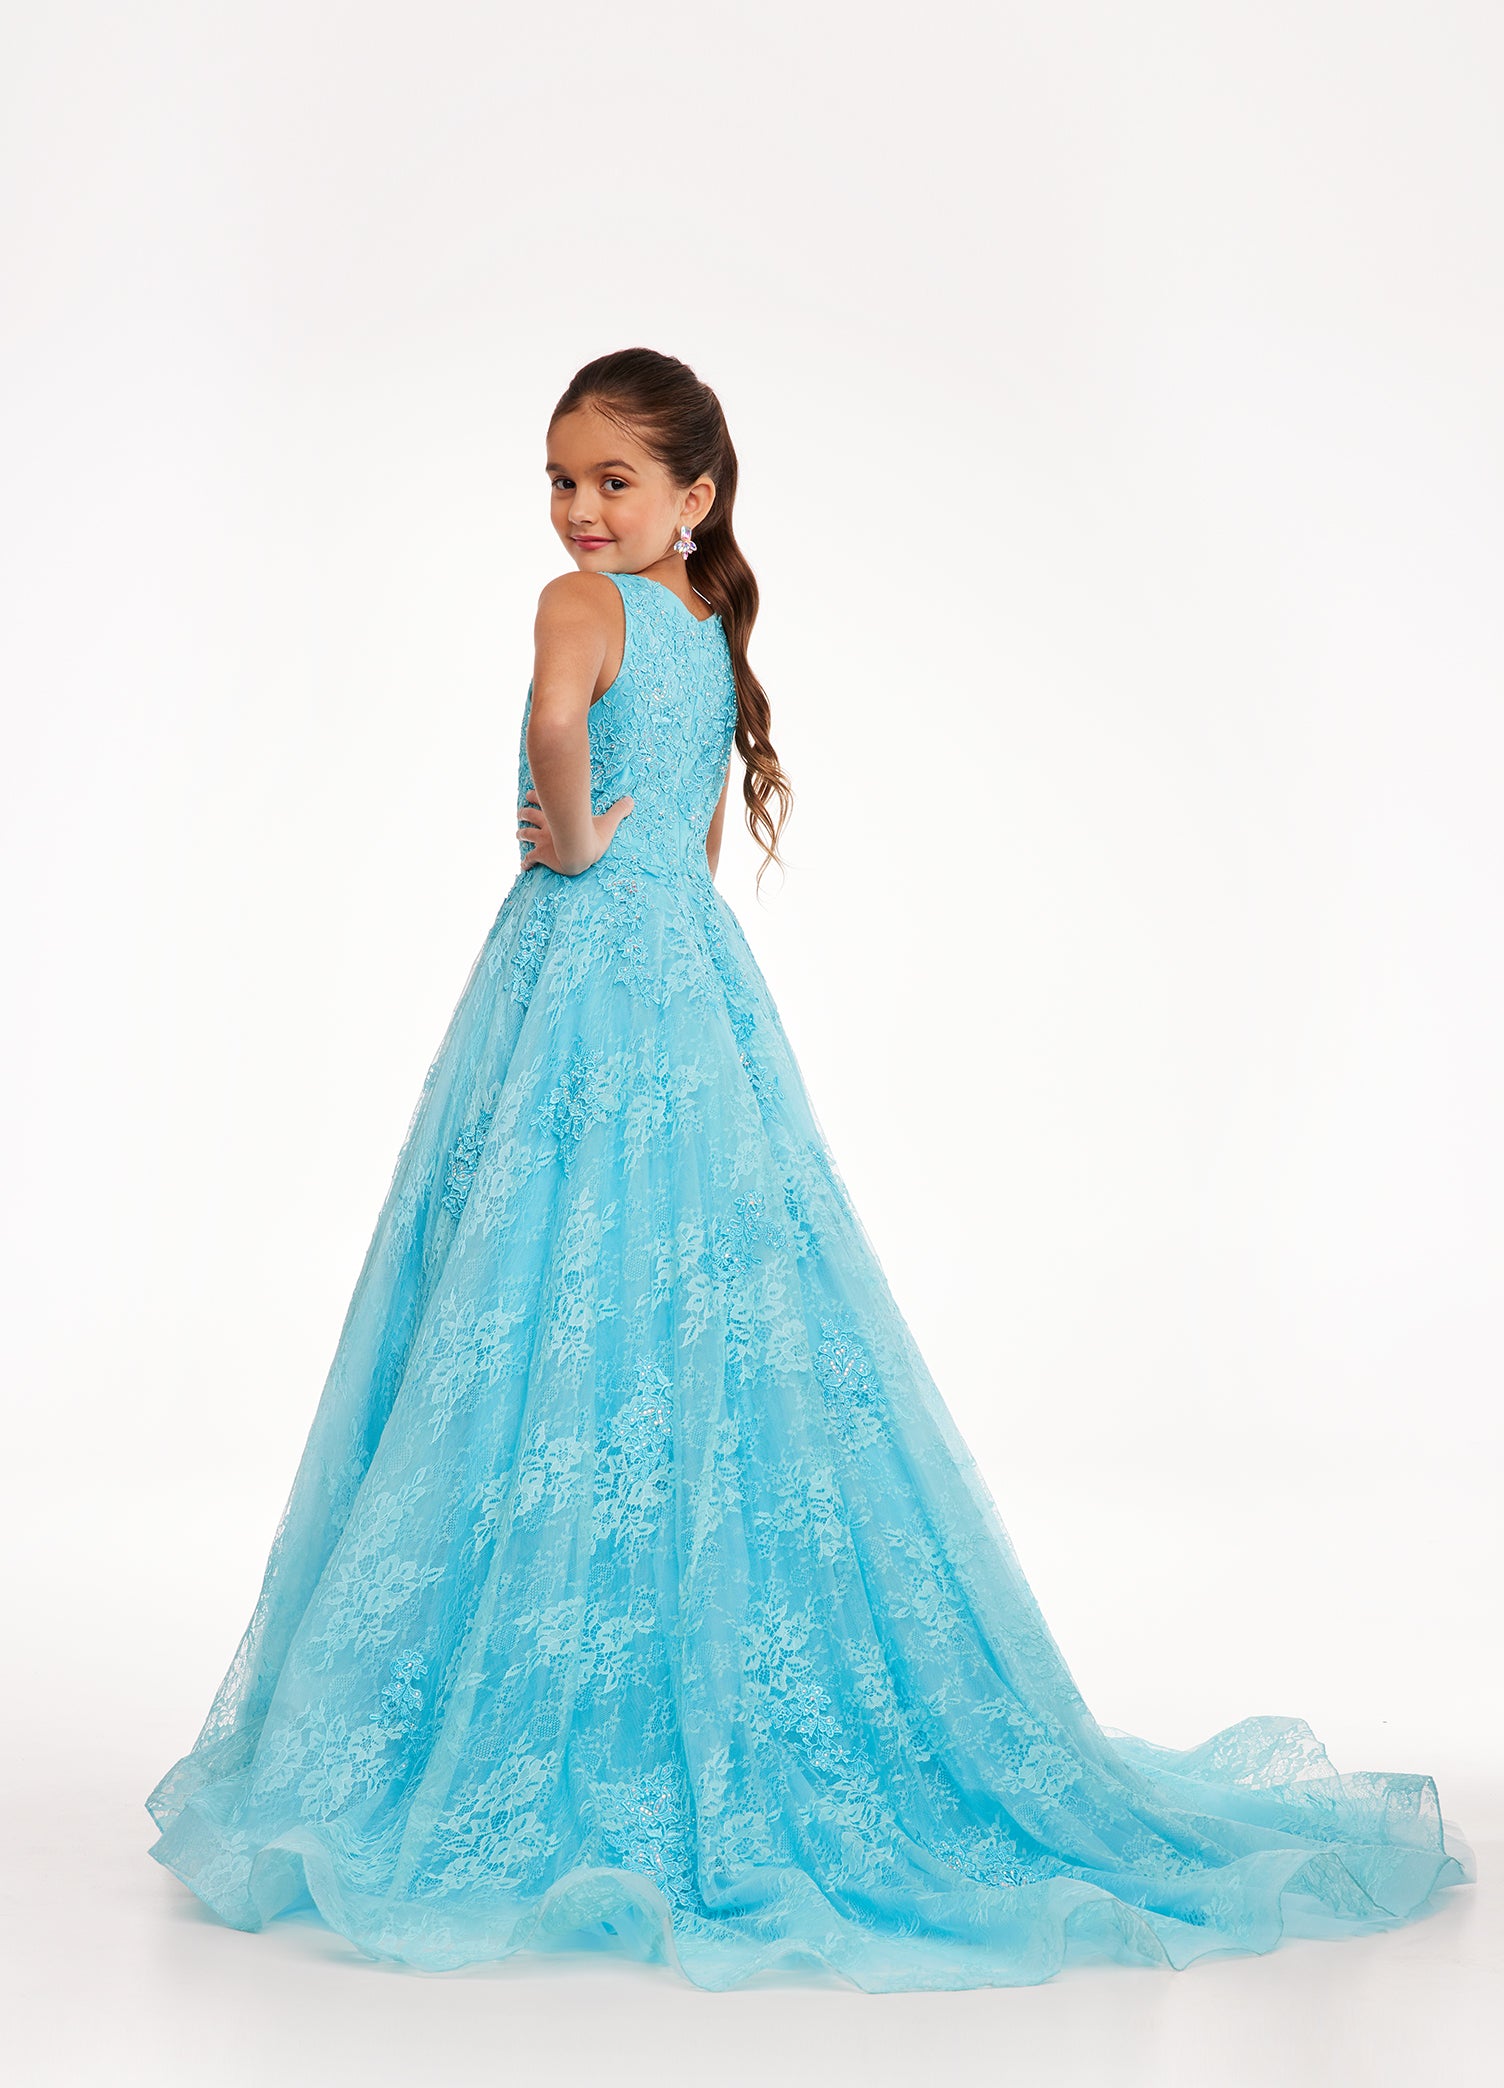 Buy Sky blue Dresses & Frocks for Girls by TOY BALLOON Online | Ajio.com